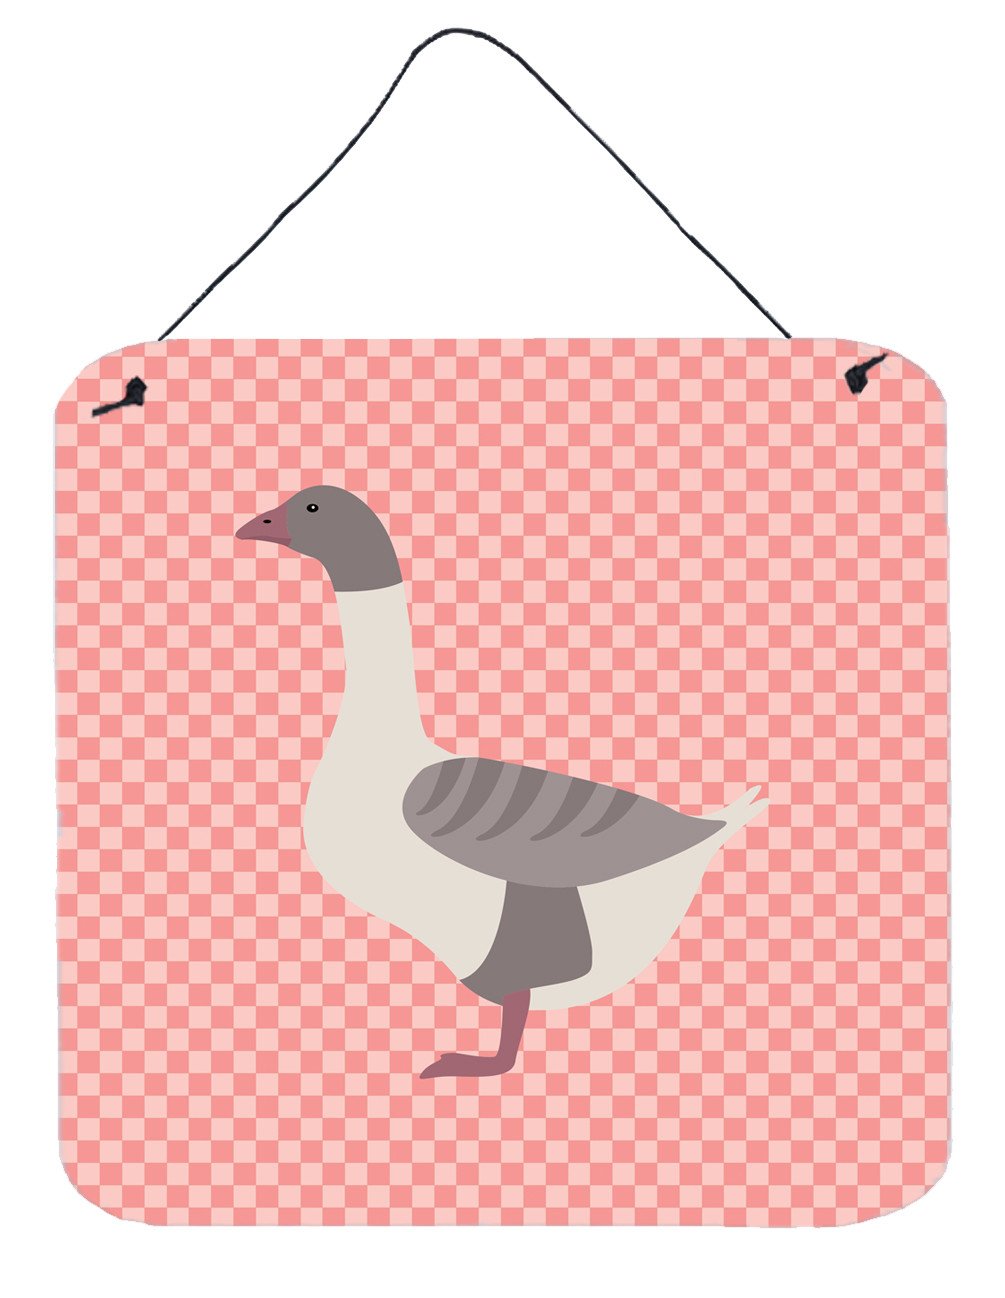 Buff Grey Back Goose Pink Check Wall or Door Hanging Prints BB7901DS66 by Caroline's Treasures